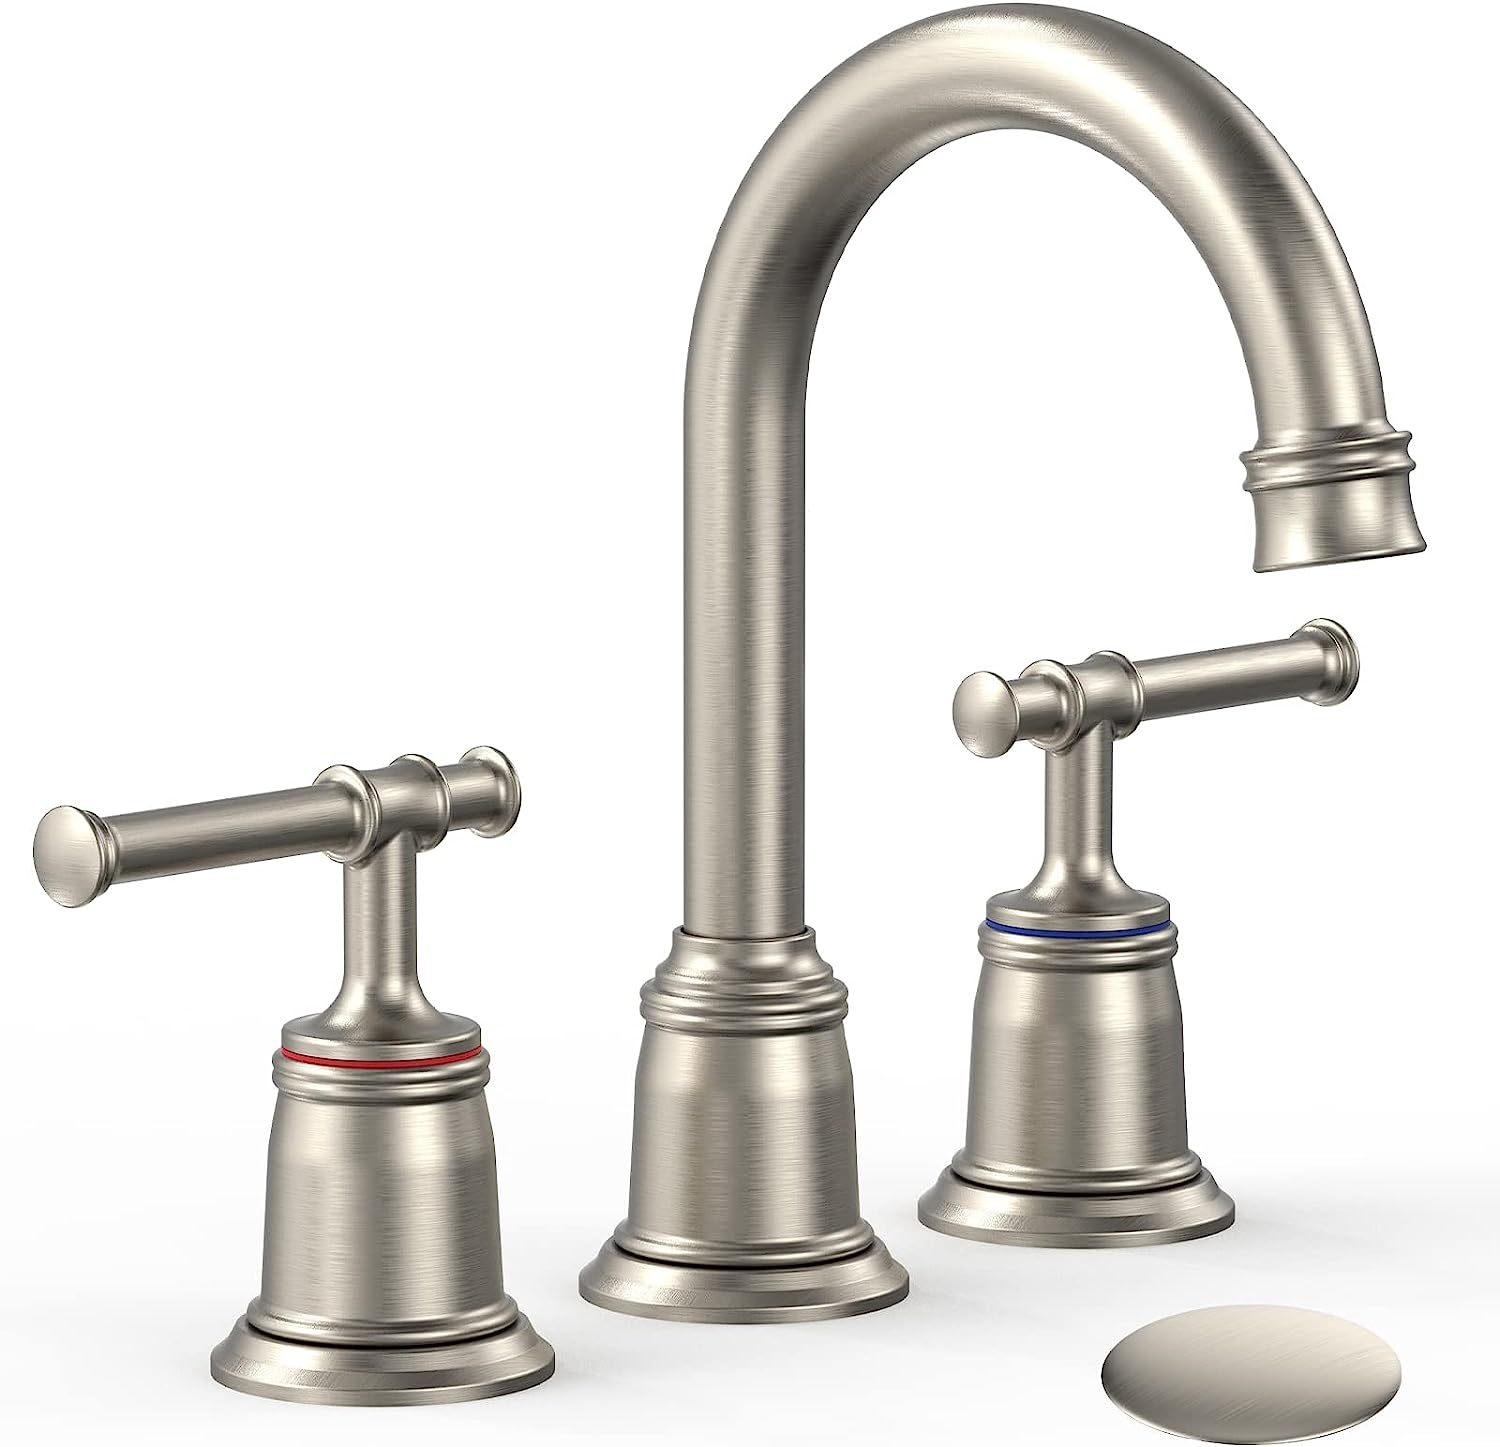 Primary image for Traditional Bathroom Faucets For Sinks With Three Holes, An 8-Inch Bathroom